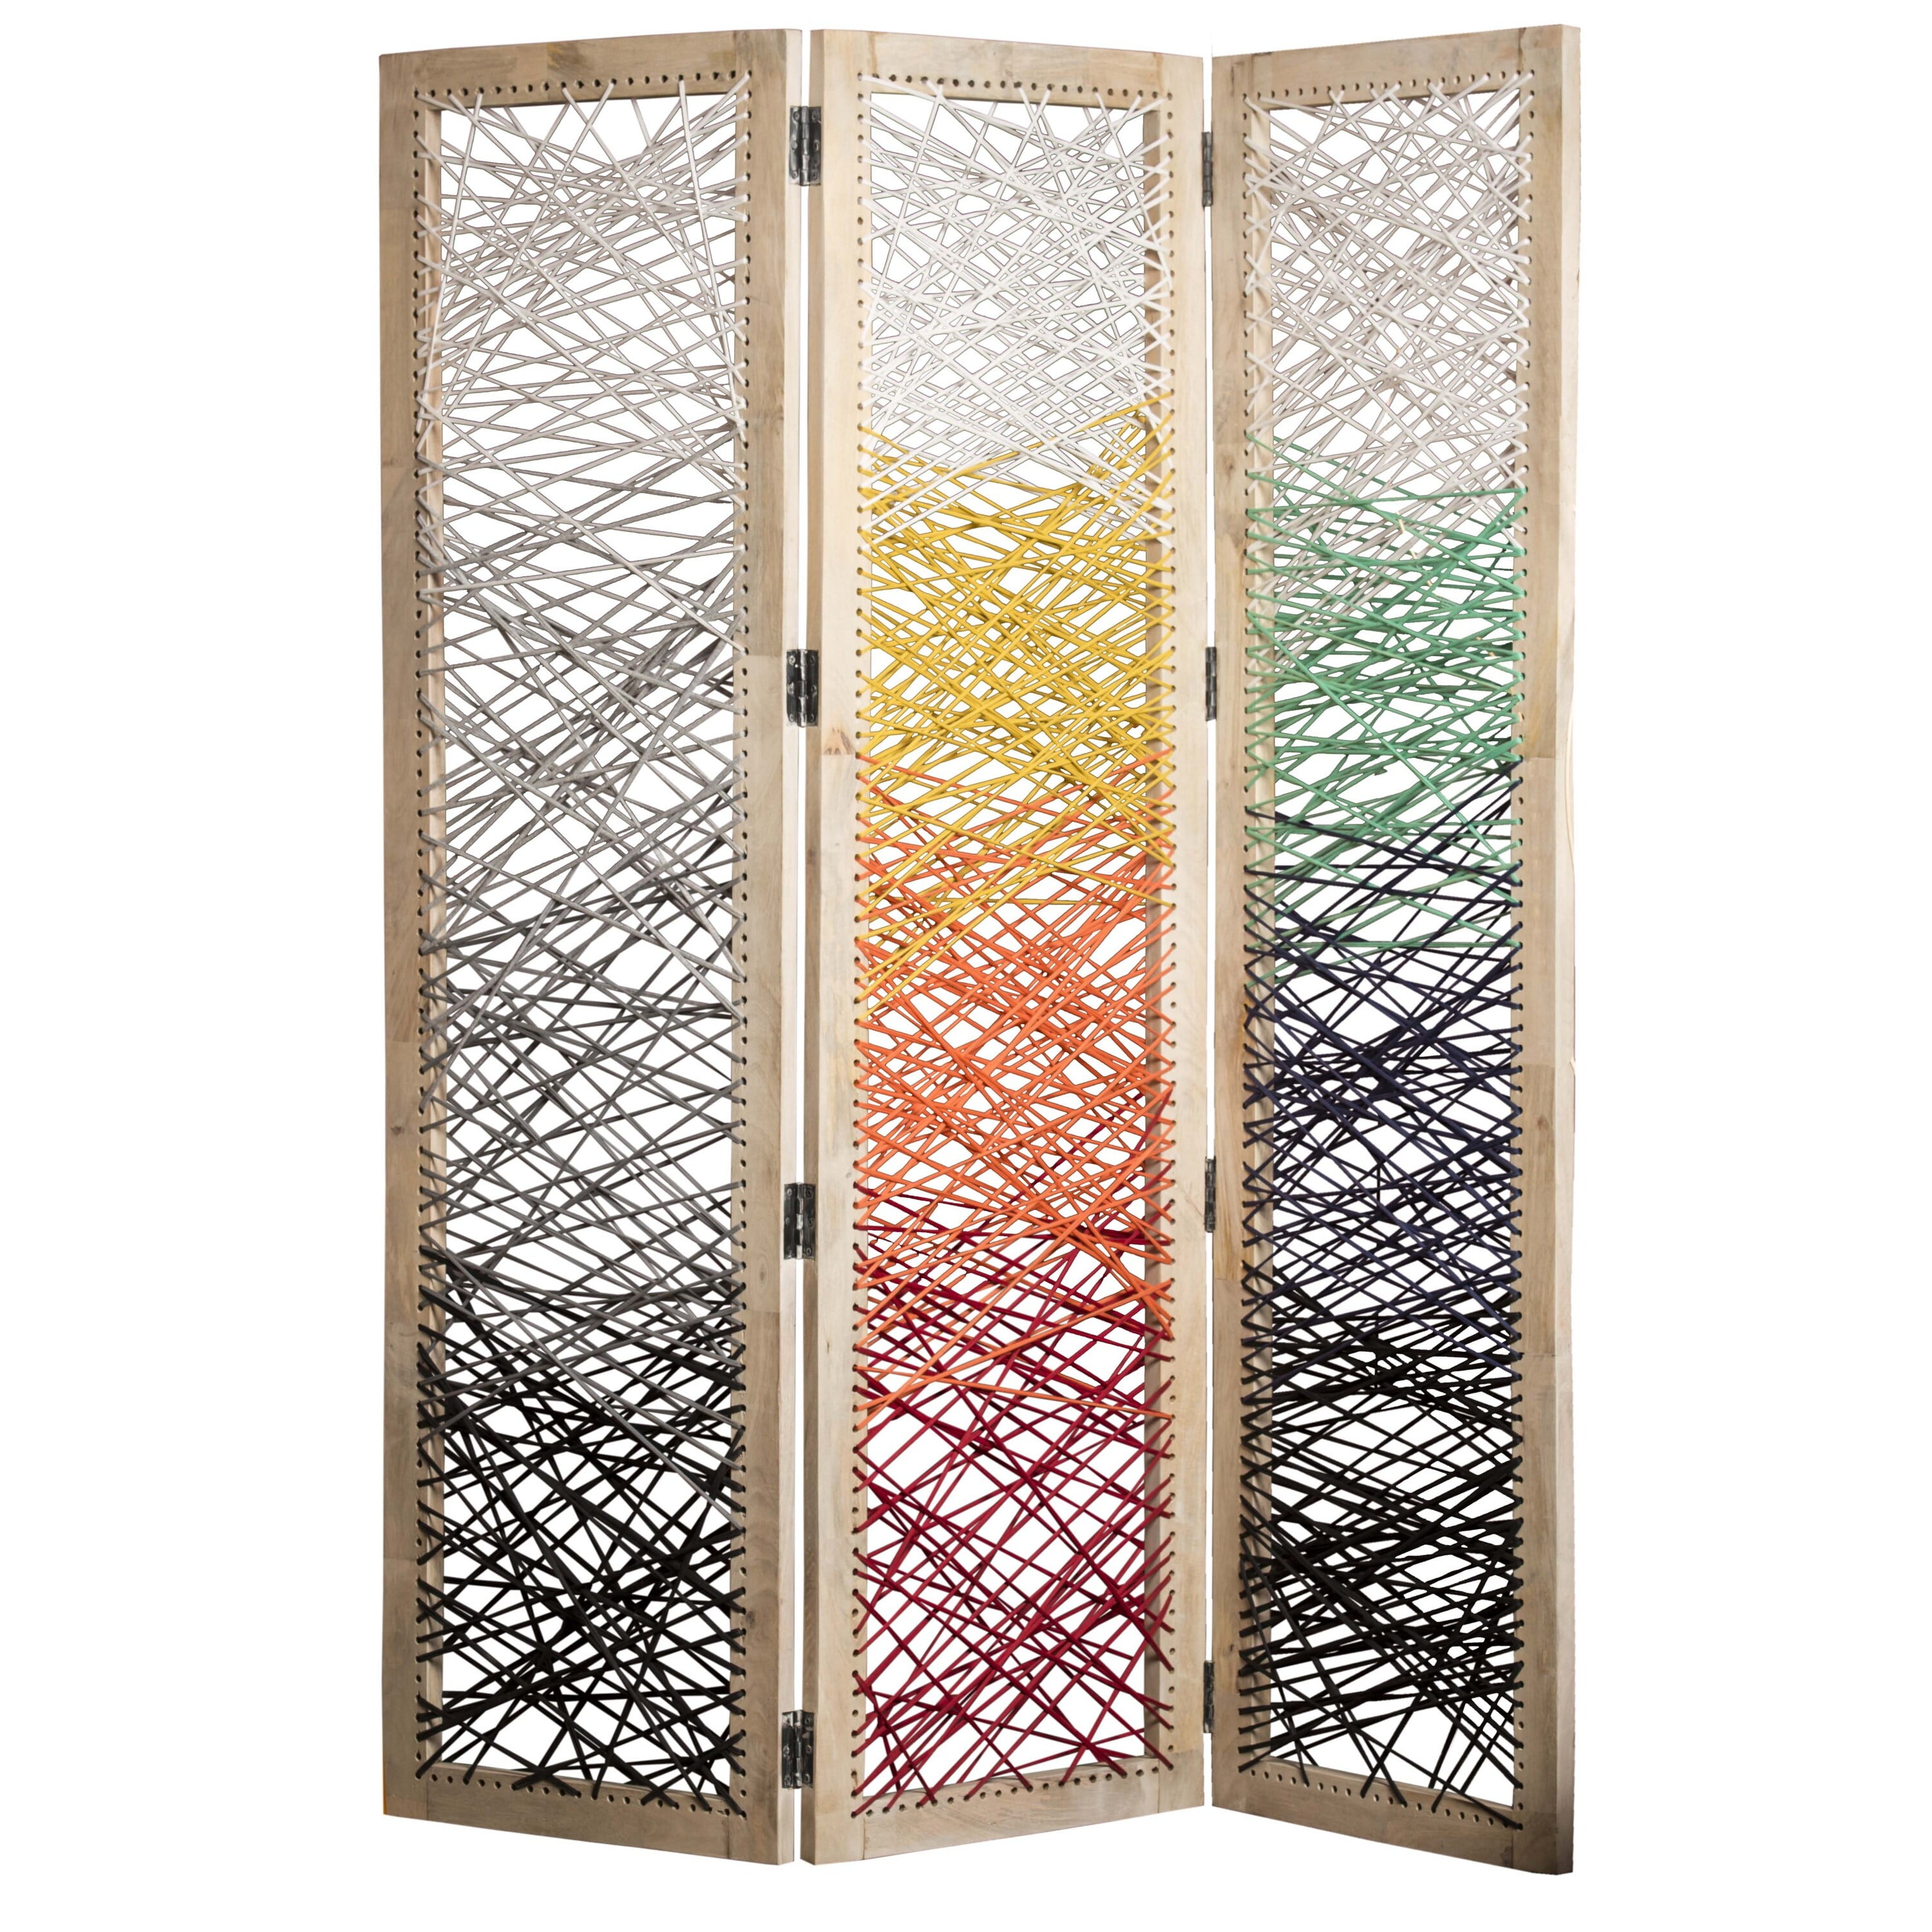 Bm228614 3 Panel Wooden Screen With Woven Reinforced Yarn, Multi Color